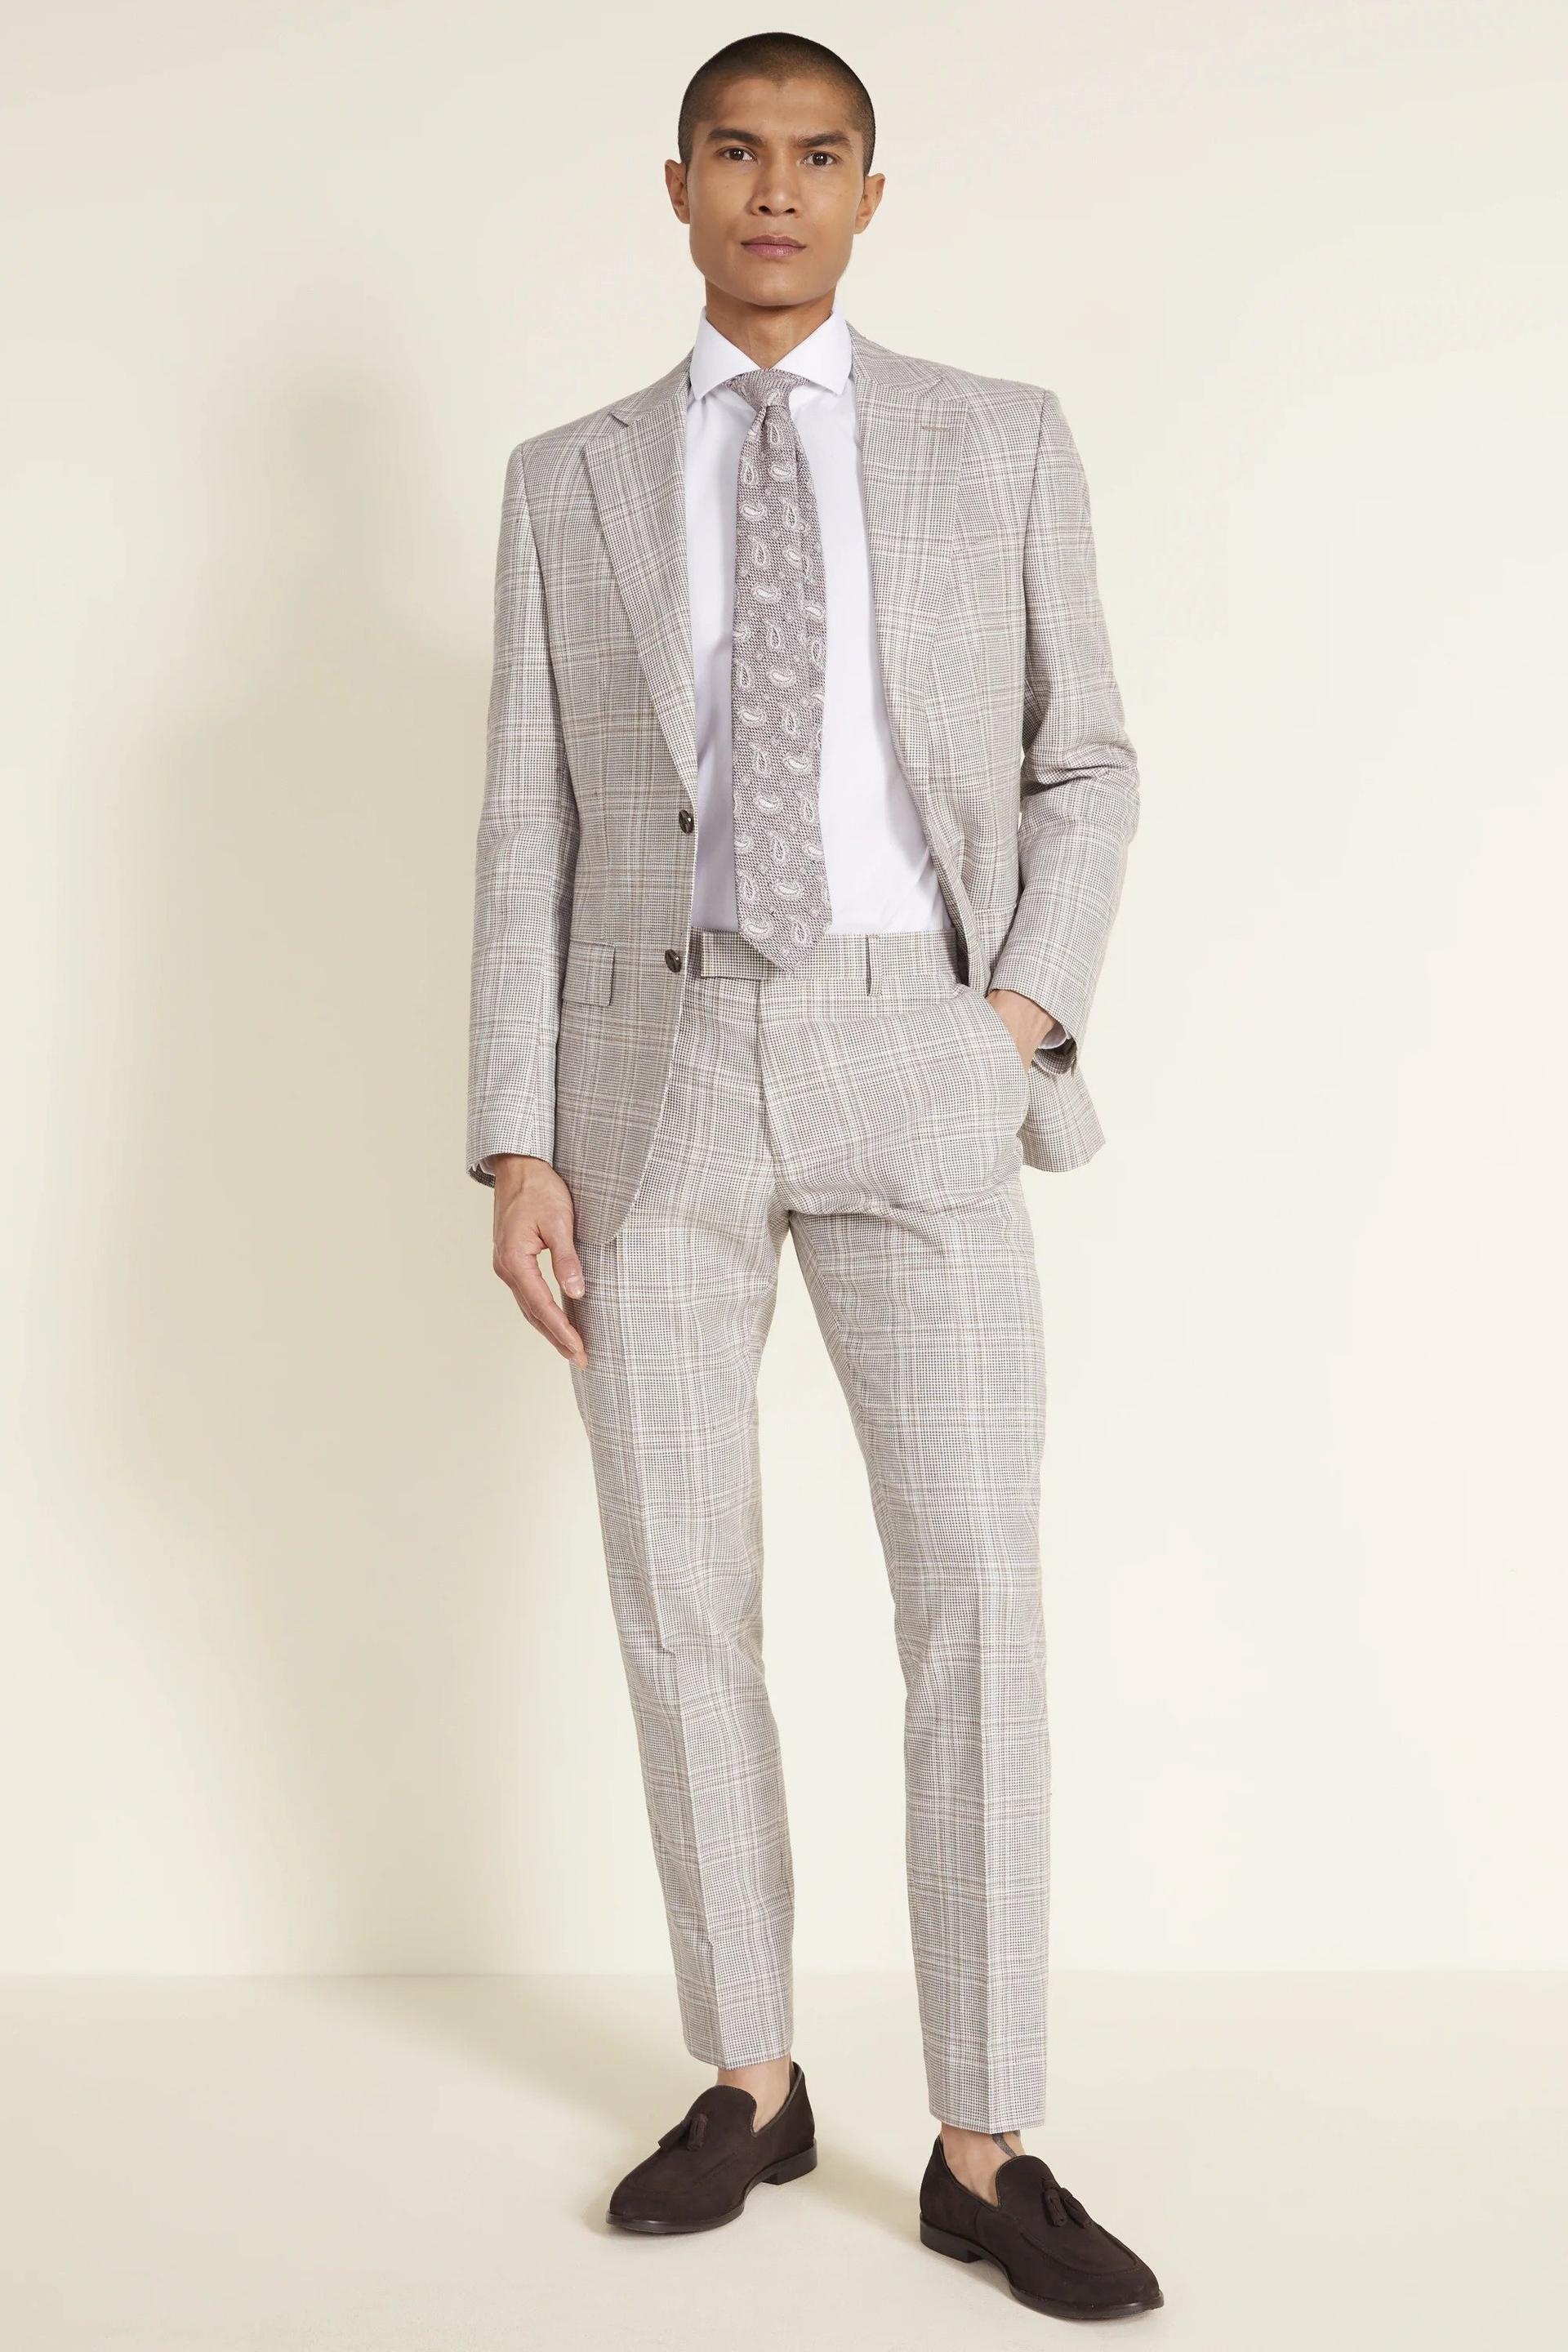 21 Best Summer Wedding Suits to Keep You Looking and Feeling Cool